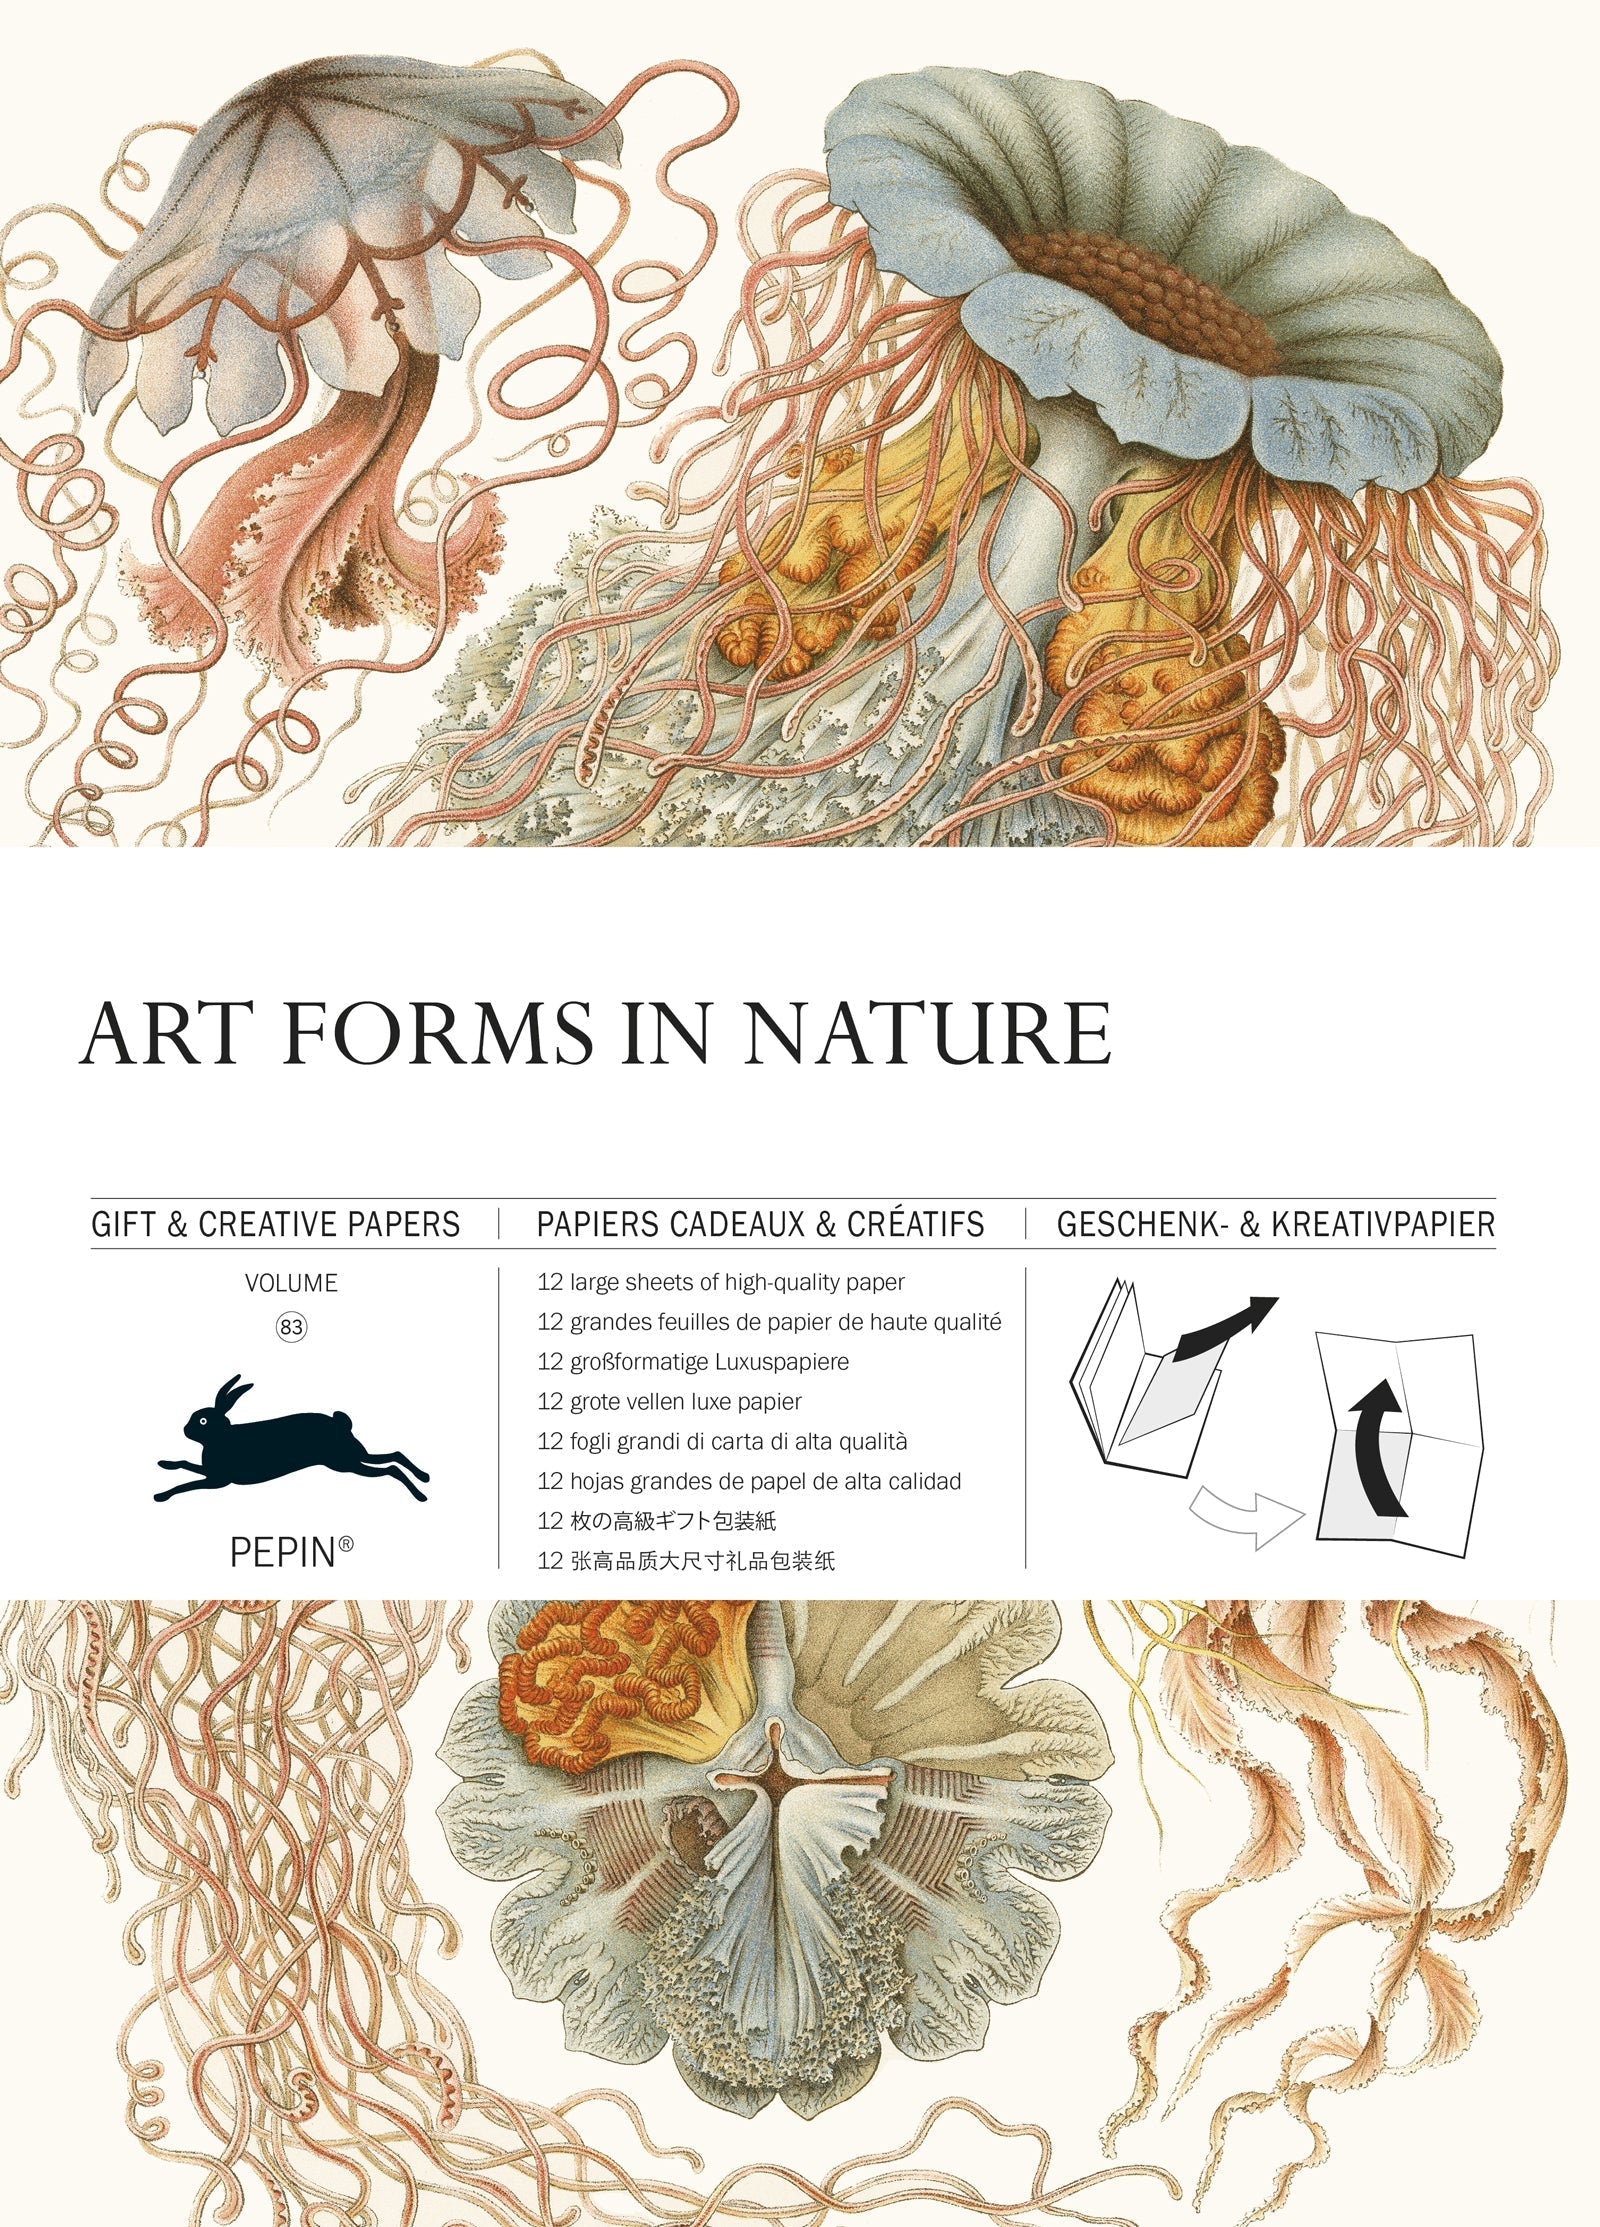 Gift & creative papers - Art Forms in Nature